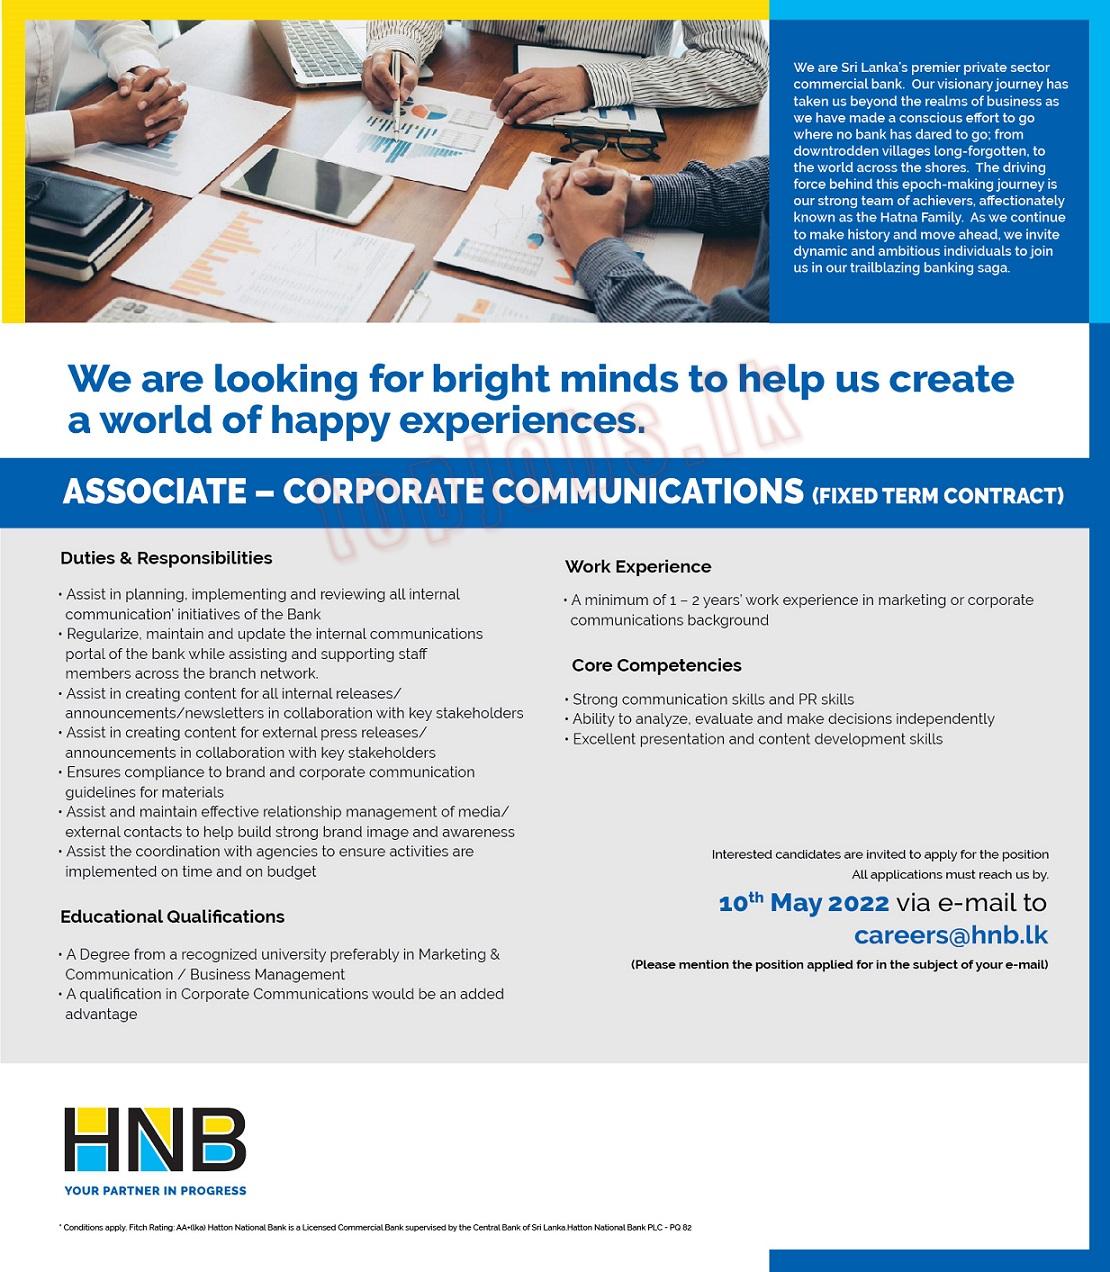 Hatton National Bank Vacancies 2022 for Associate of Corporate Communications